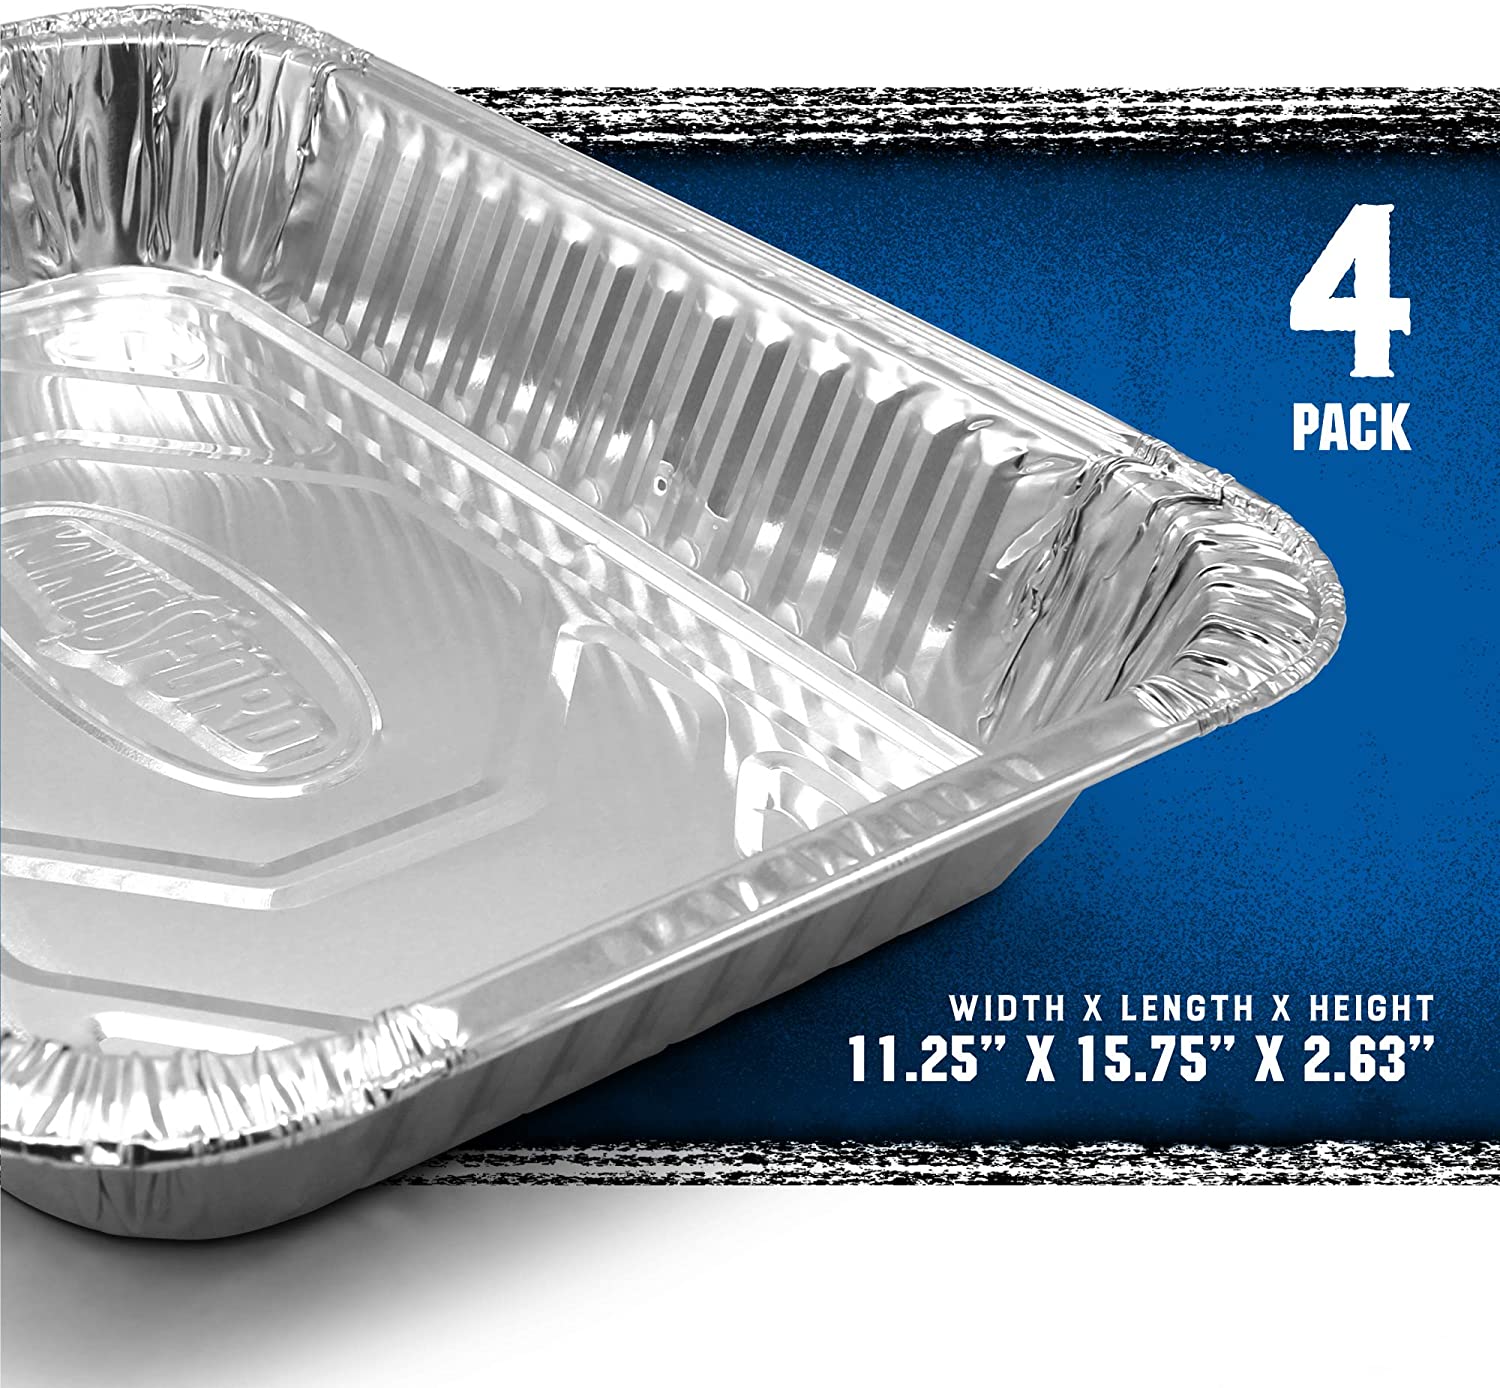 Kingsford All-Purpose Pans 3549994100 - The Home Depot